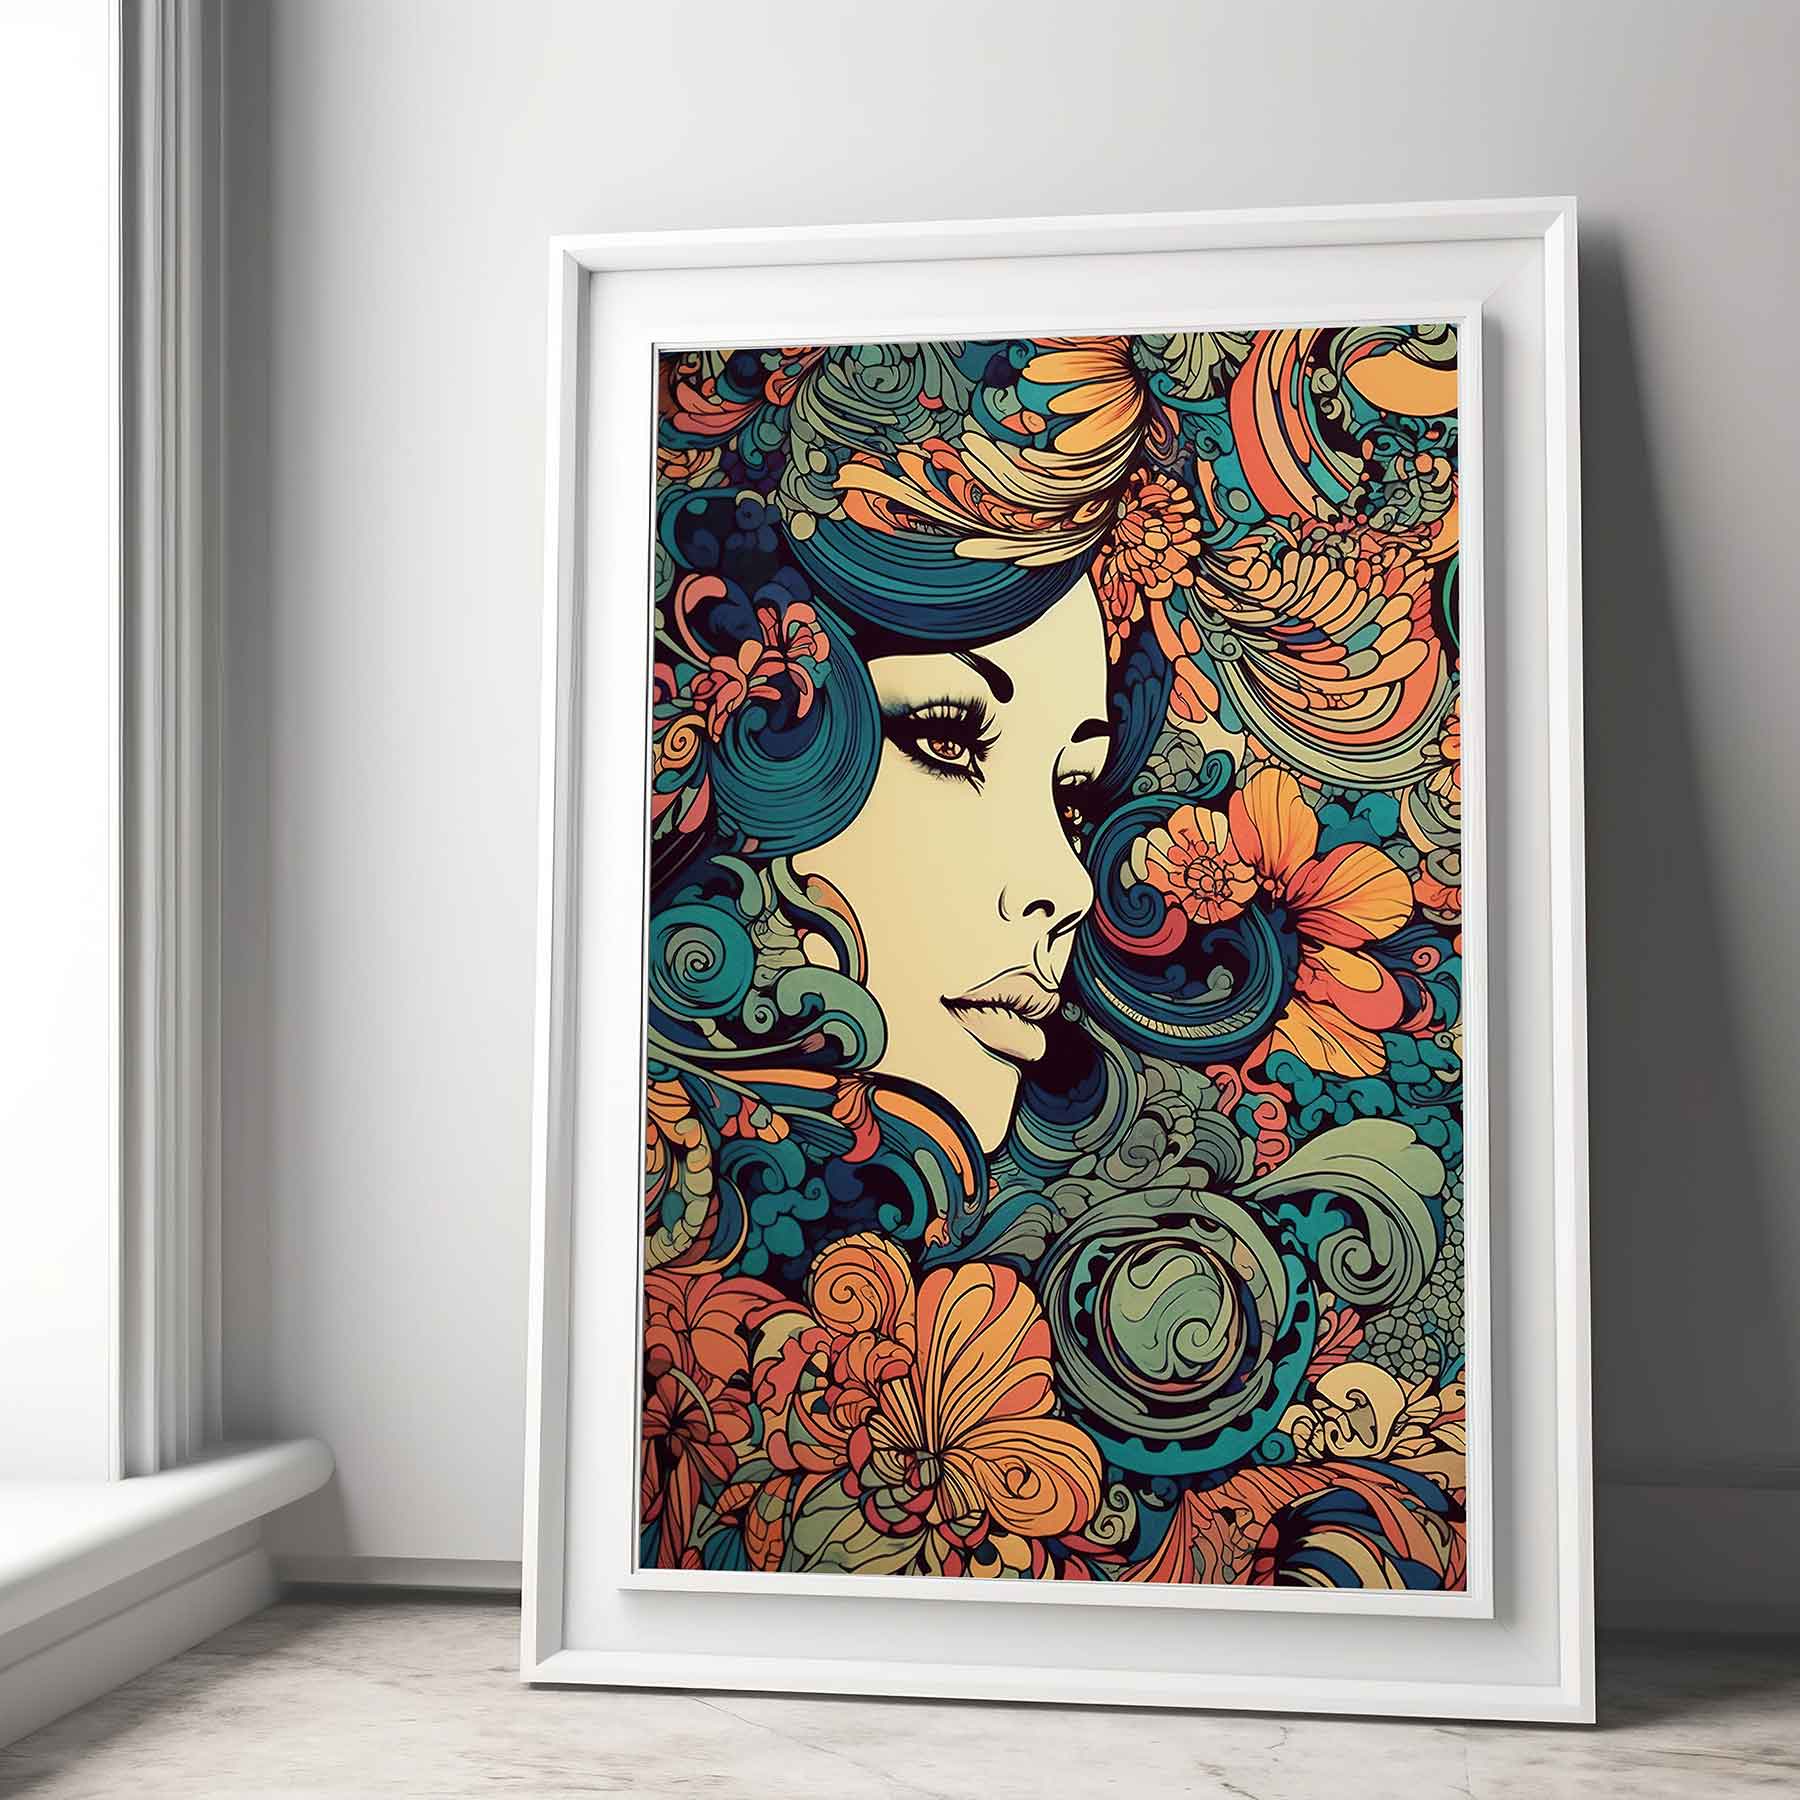 Framed Image of Parisian Vintage 70s Art Nouveau Psychedelic Wall Art Poster Print